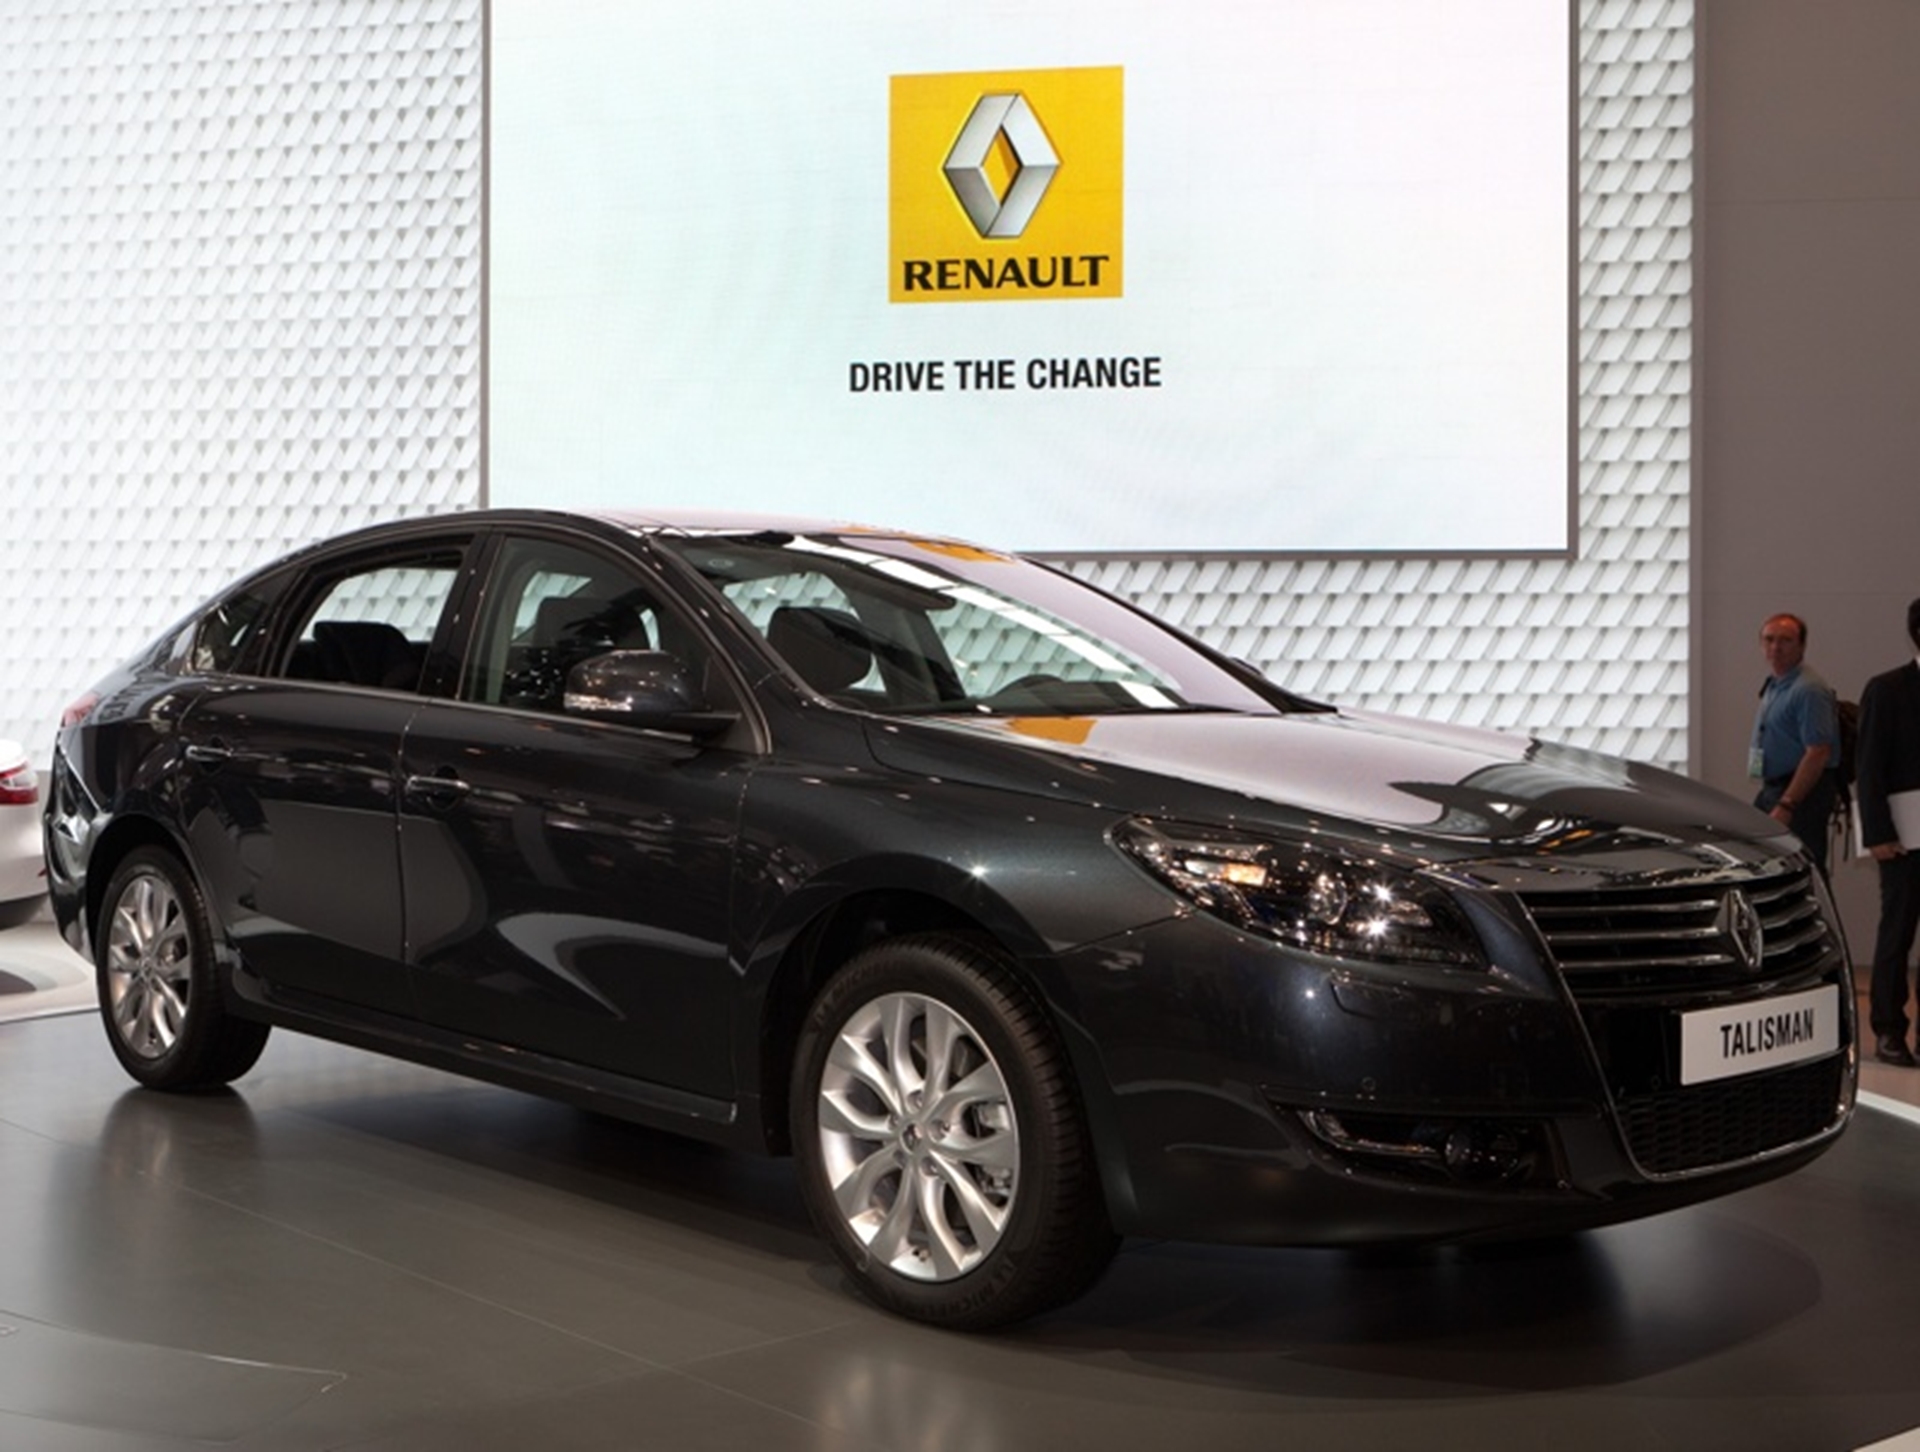 2012 Beijing Auto Show, Renault confirms its ambitions in China with the launch of Renault Talisman